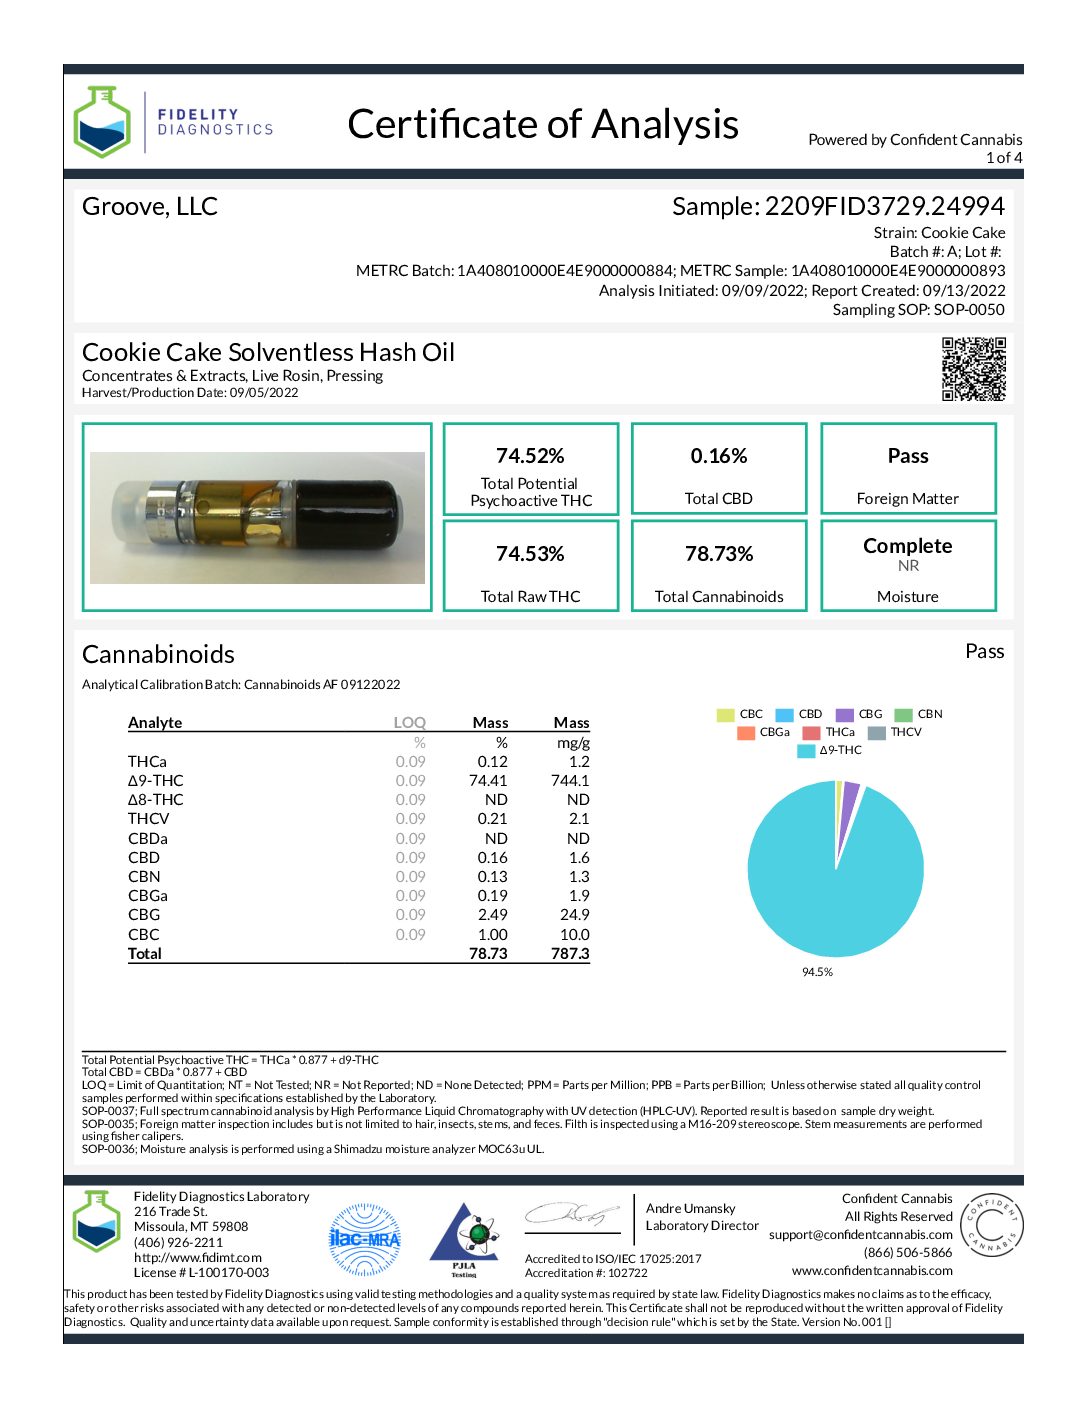 https://groovesolventless.com/wp-content/uploads/2022/09/Cookie-Cake-Solventless-Hash-Oil-HB-19-pdf.jpg